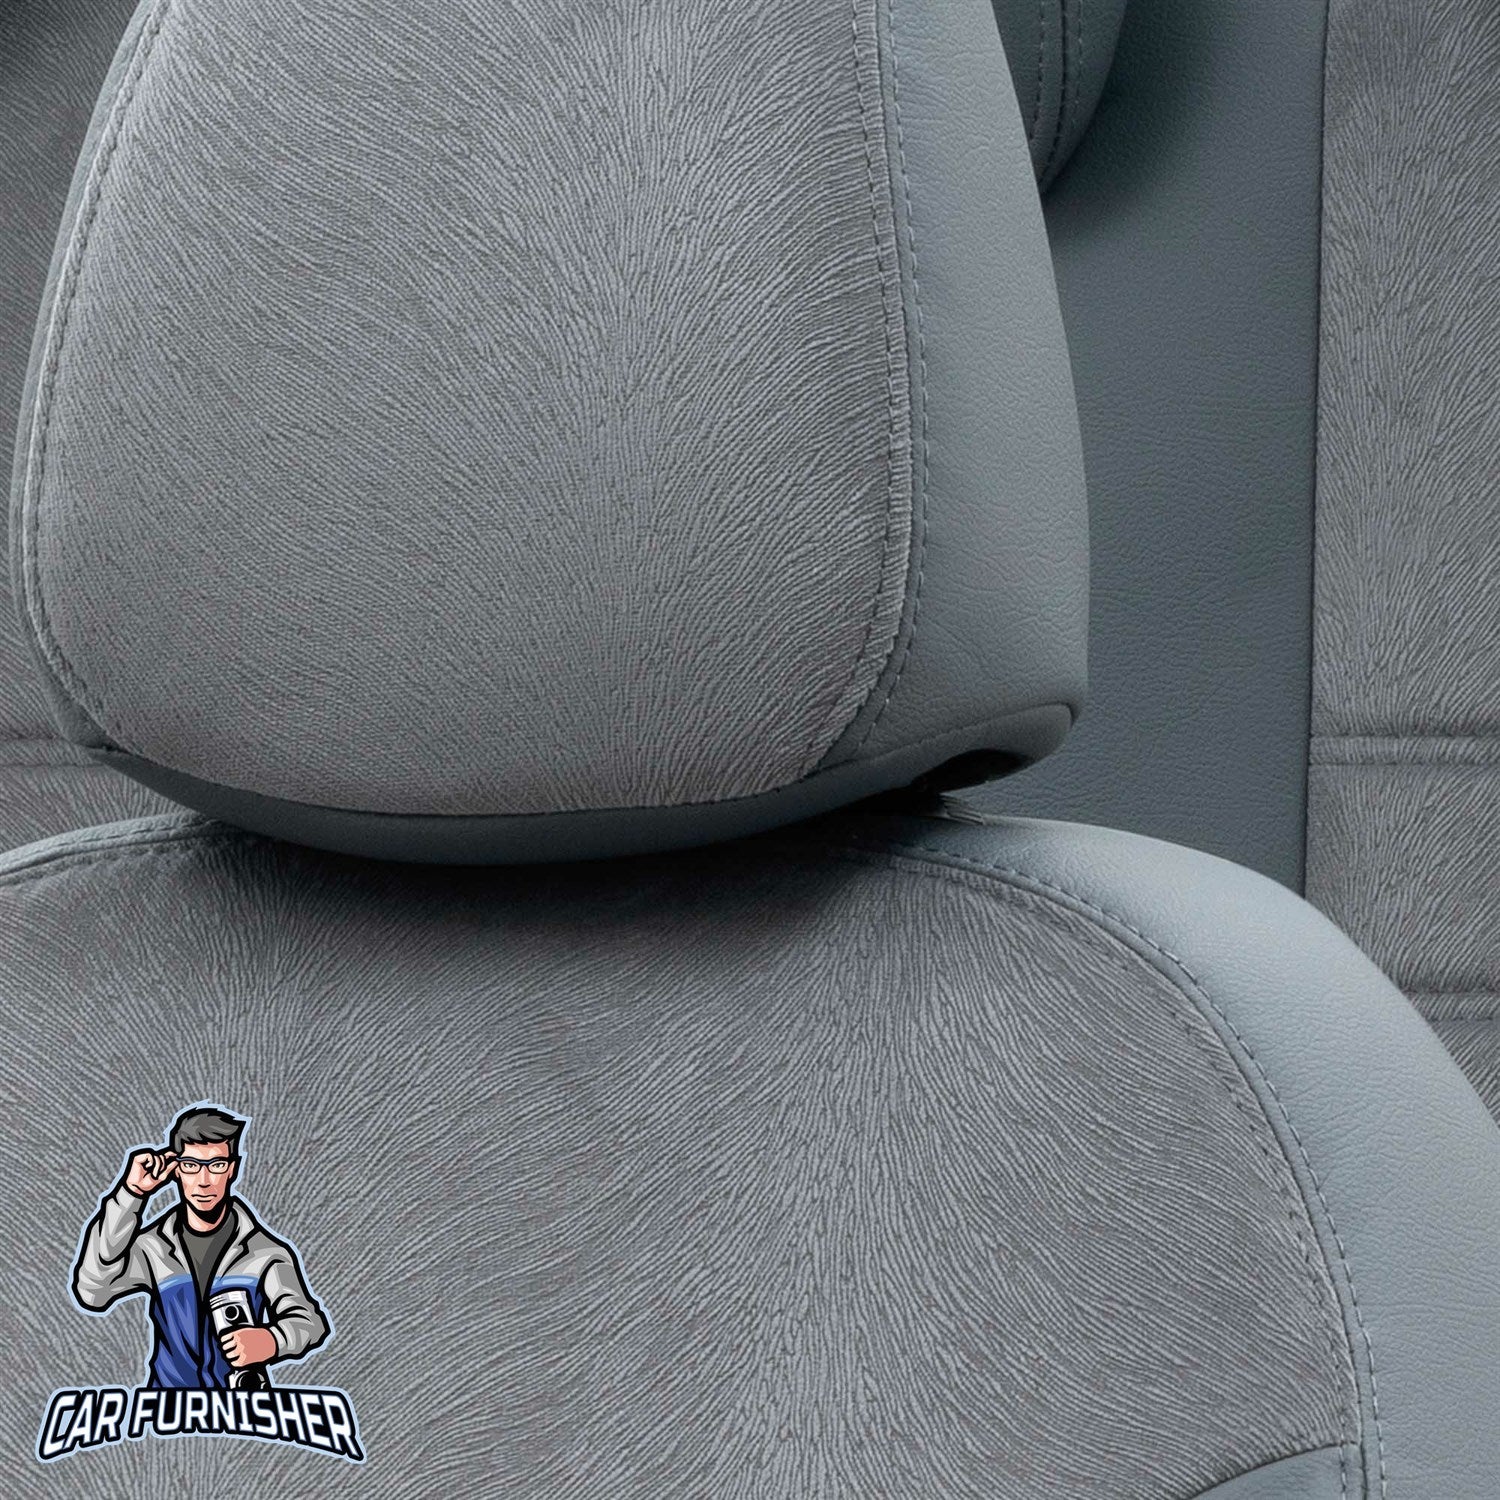 Audi A1 Car Seat Cover 2011-2016 Custom Made London Design Smoked Full Set (5 Seats + Handrest) Leather & Fabric